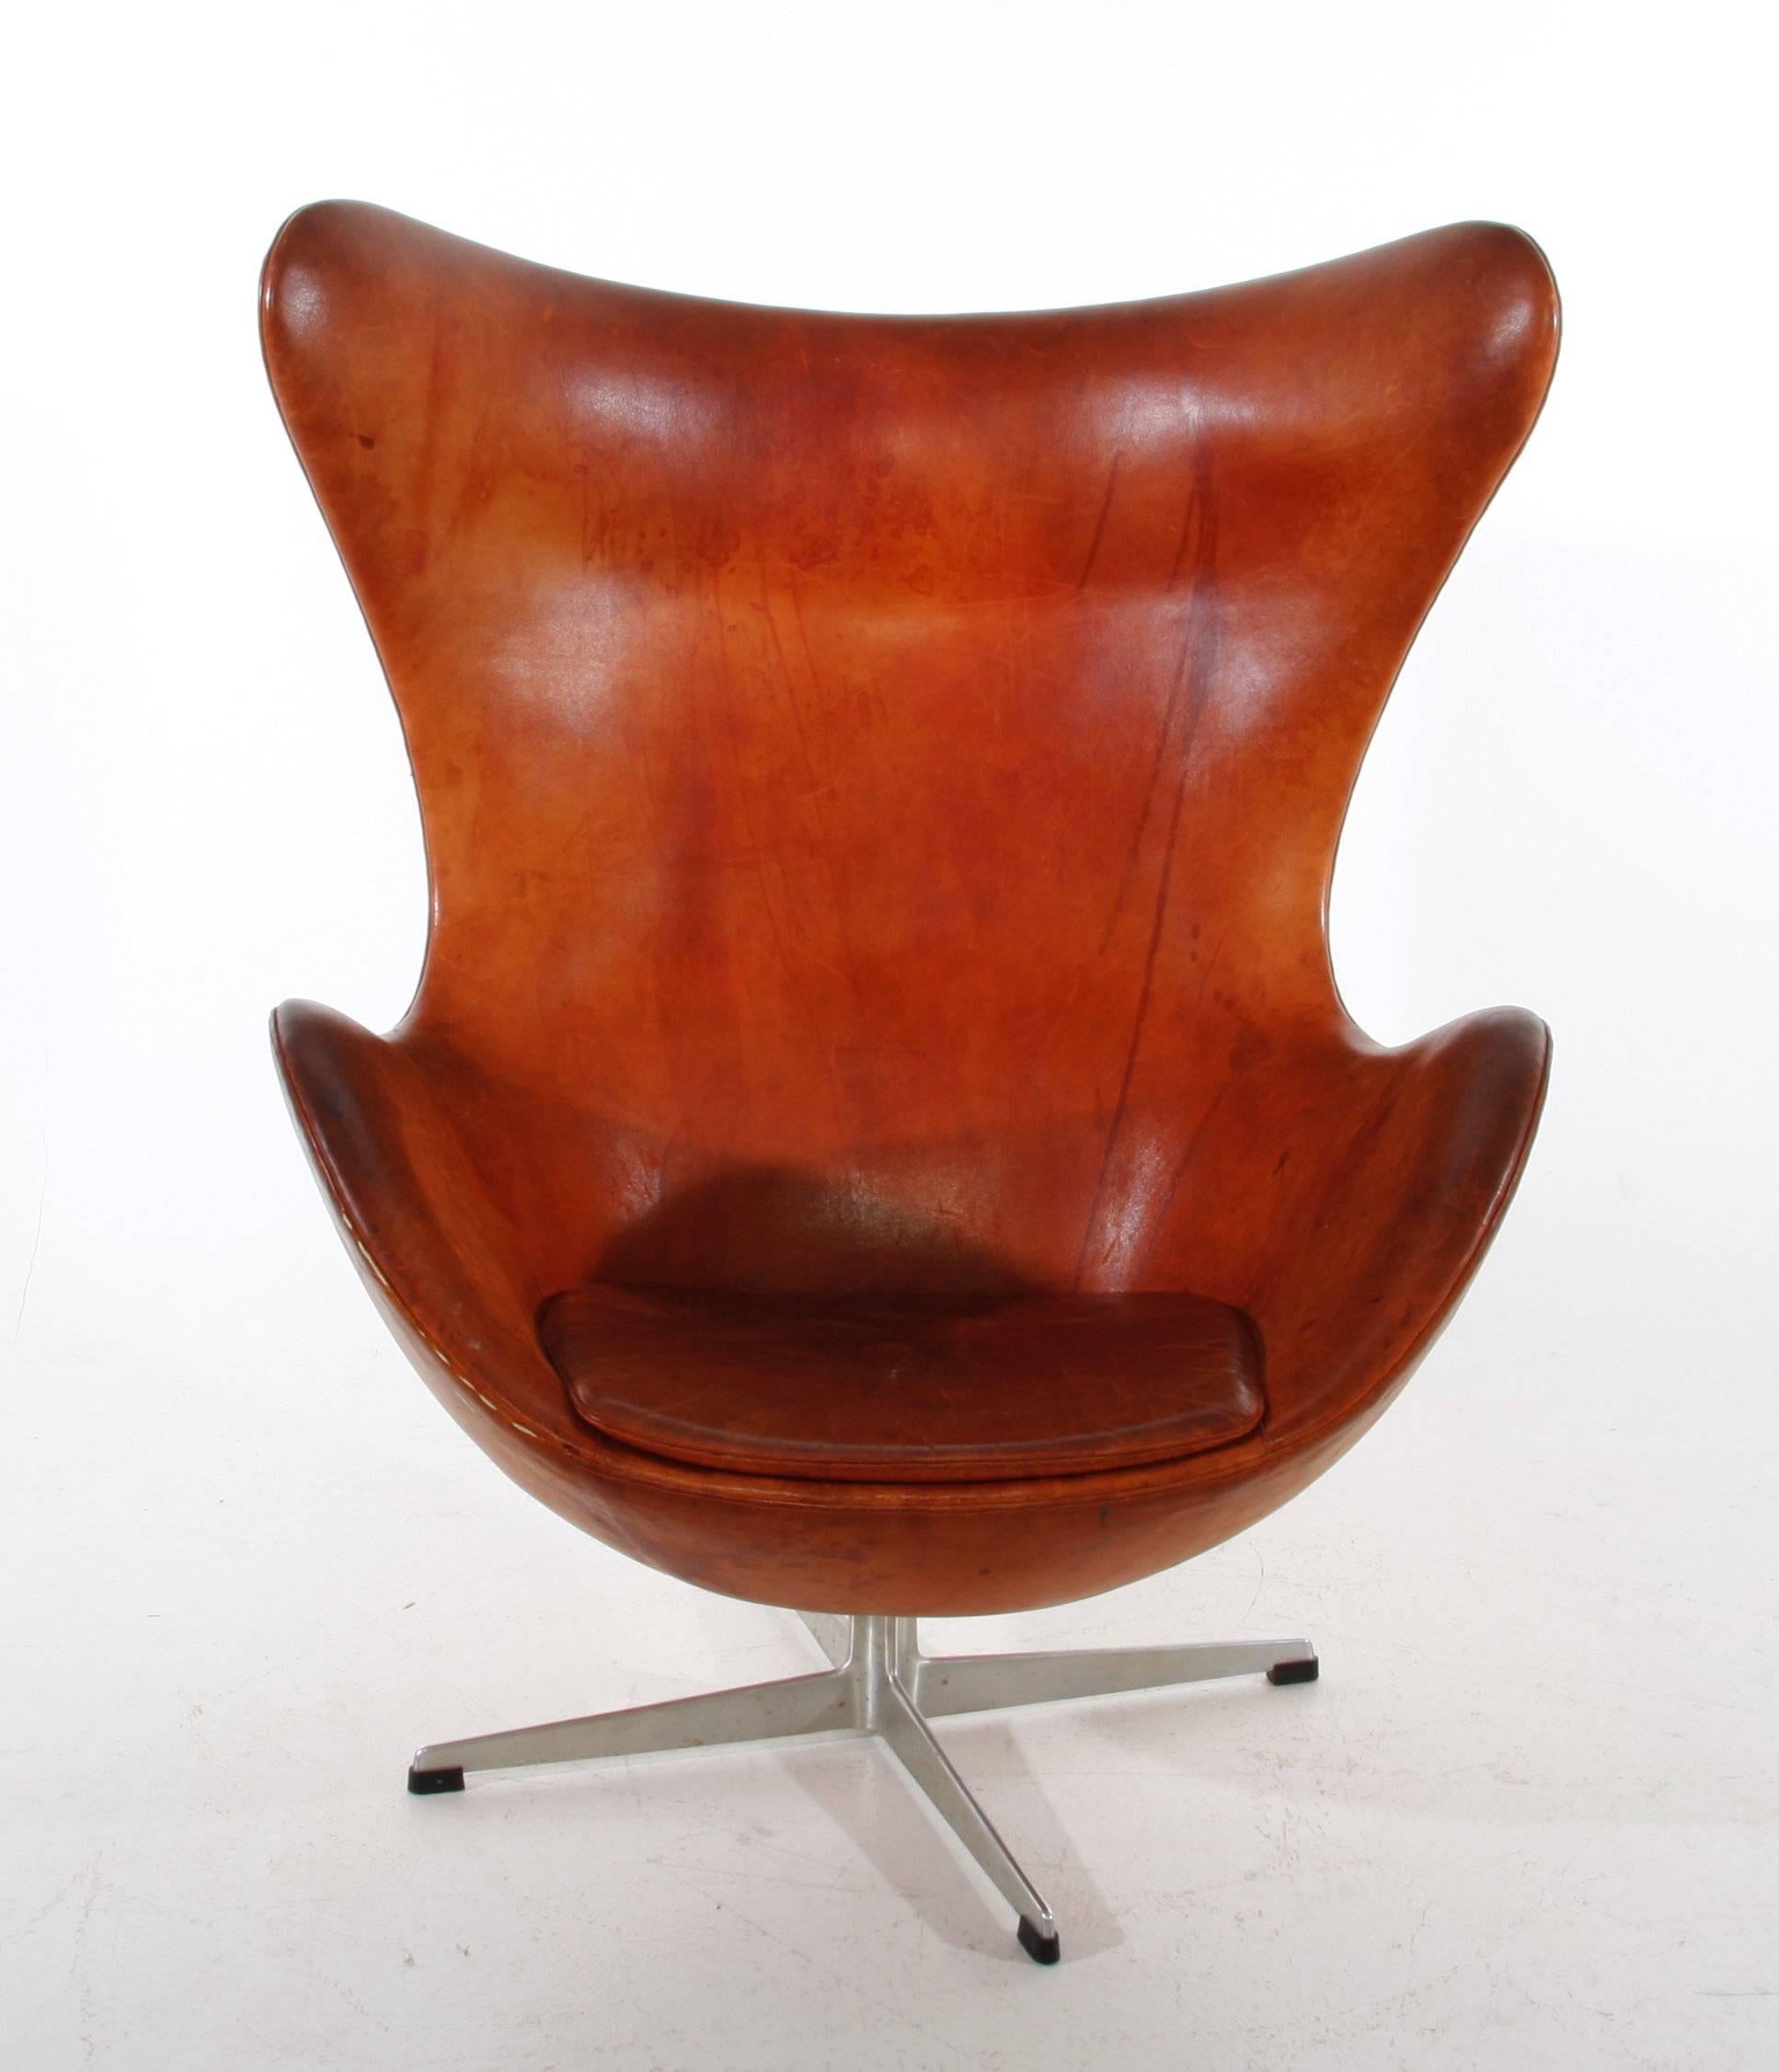 Early easy Egg chair model 3316 designed by Arne Jacobsen and produced by Fritz Hansen in Denmark in 1958. Vintage leather upholstered.